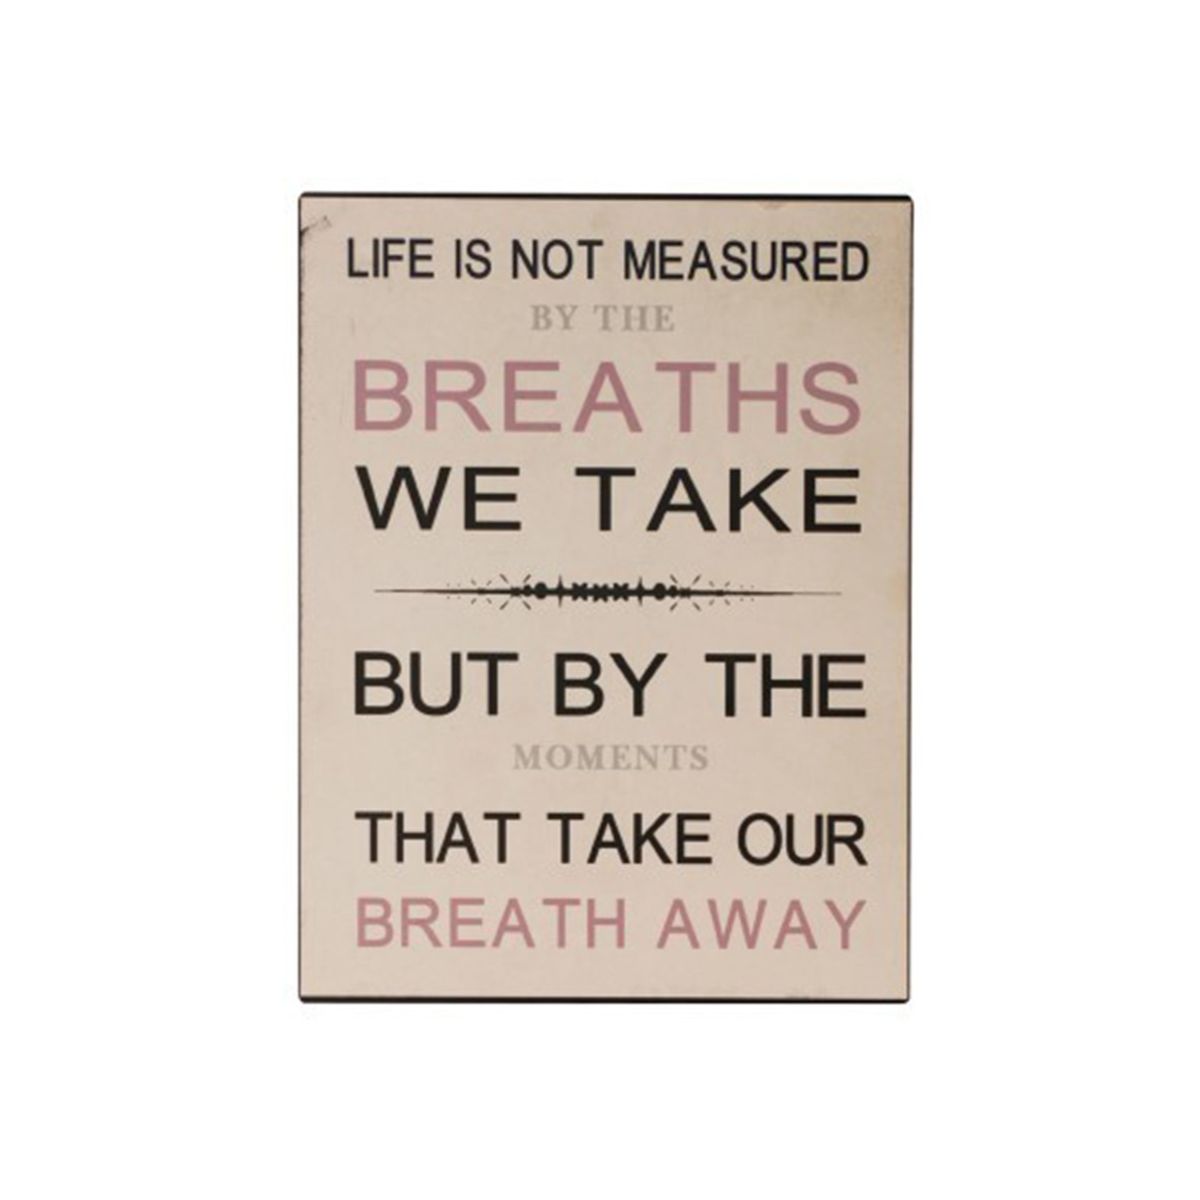 Placa Parede "Life is not measured"